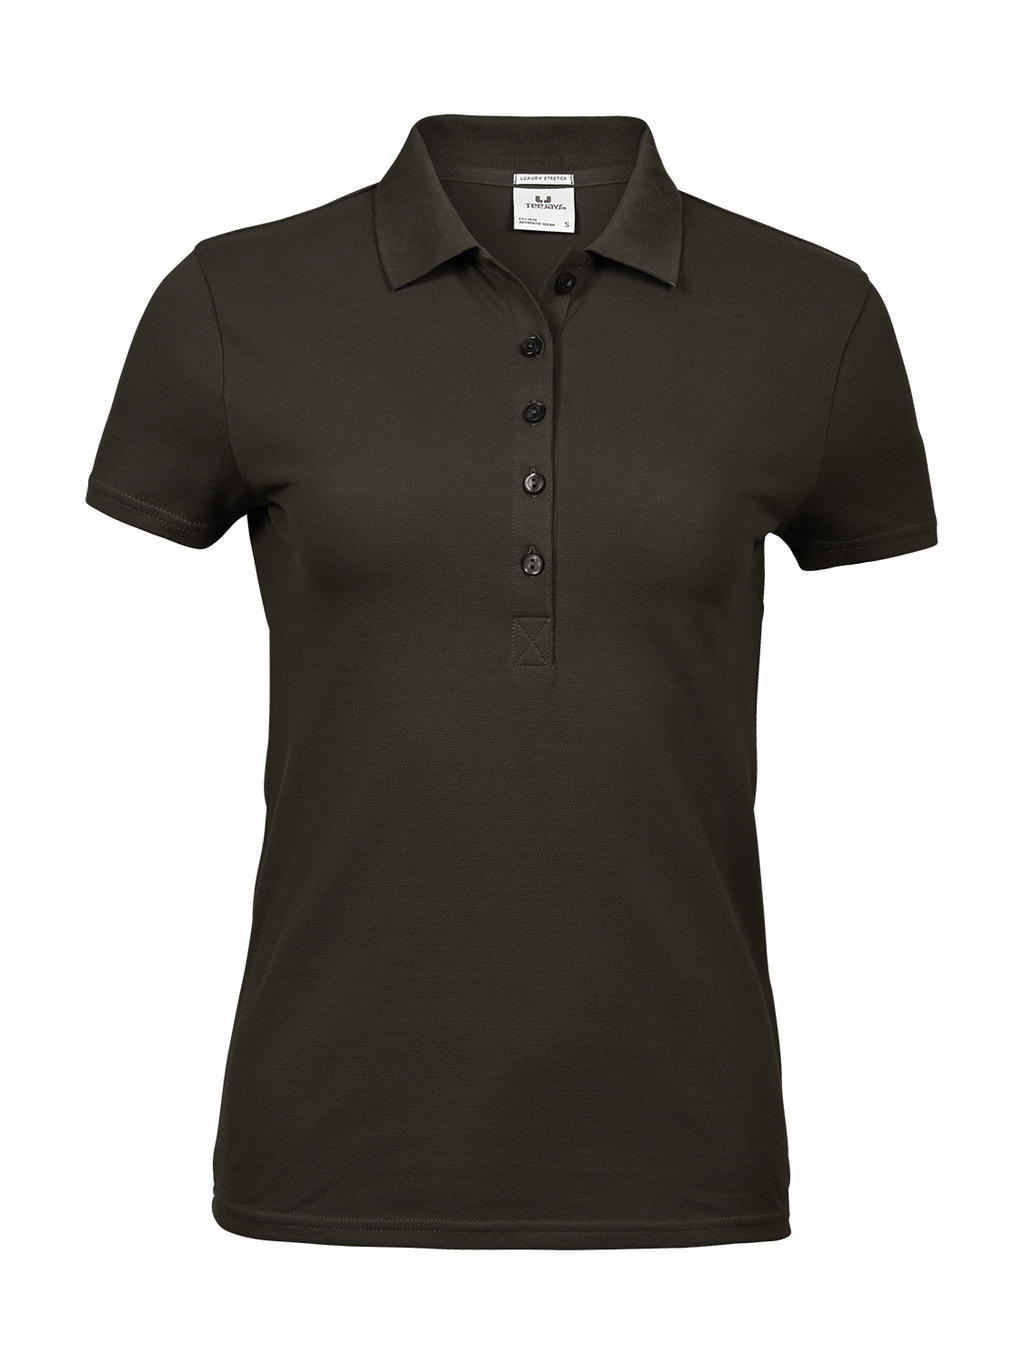  Ladies Luxury Stretch Polo in Farbe Dark Olive